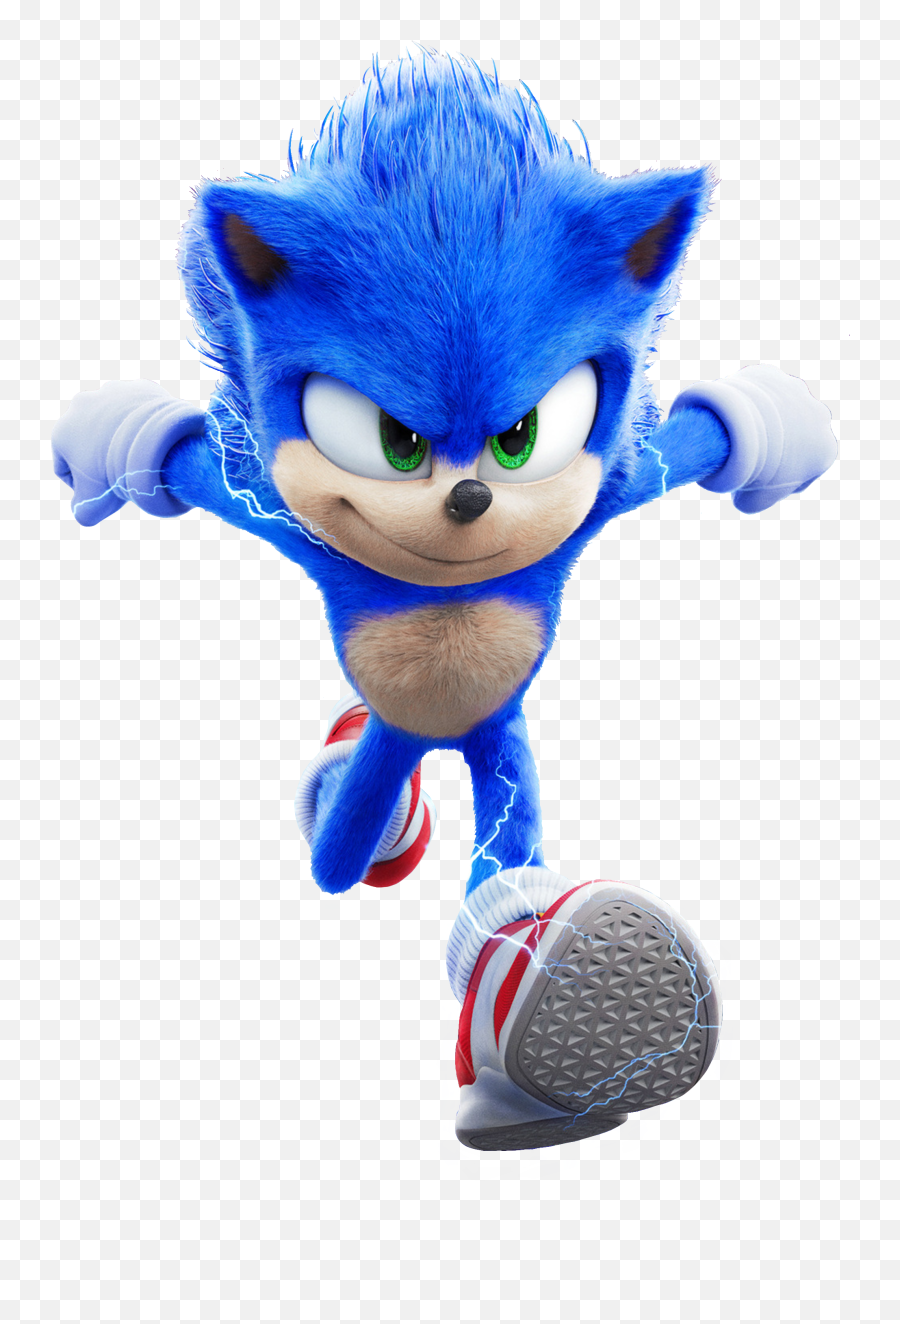 Largest Collection Of Free - Sonic The Hedgehog Movie Png Emoji,Sonic Boom Emoji Plush